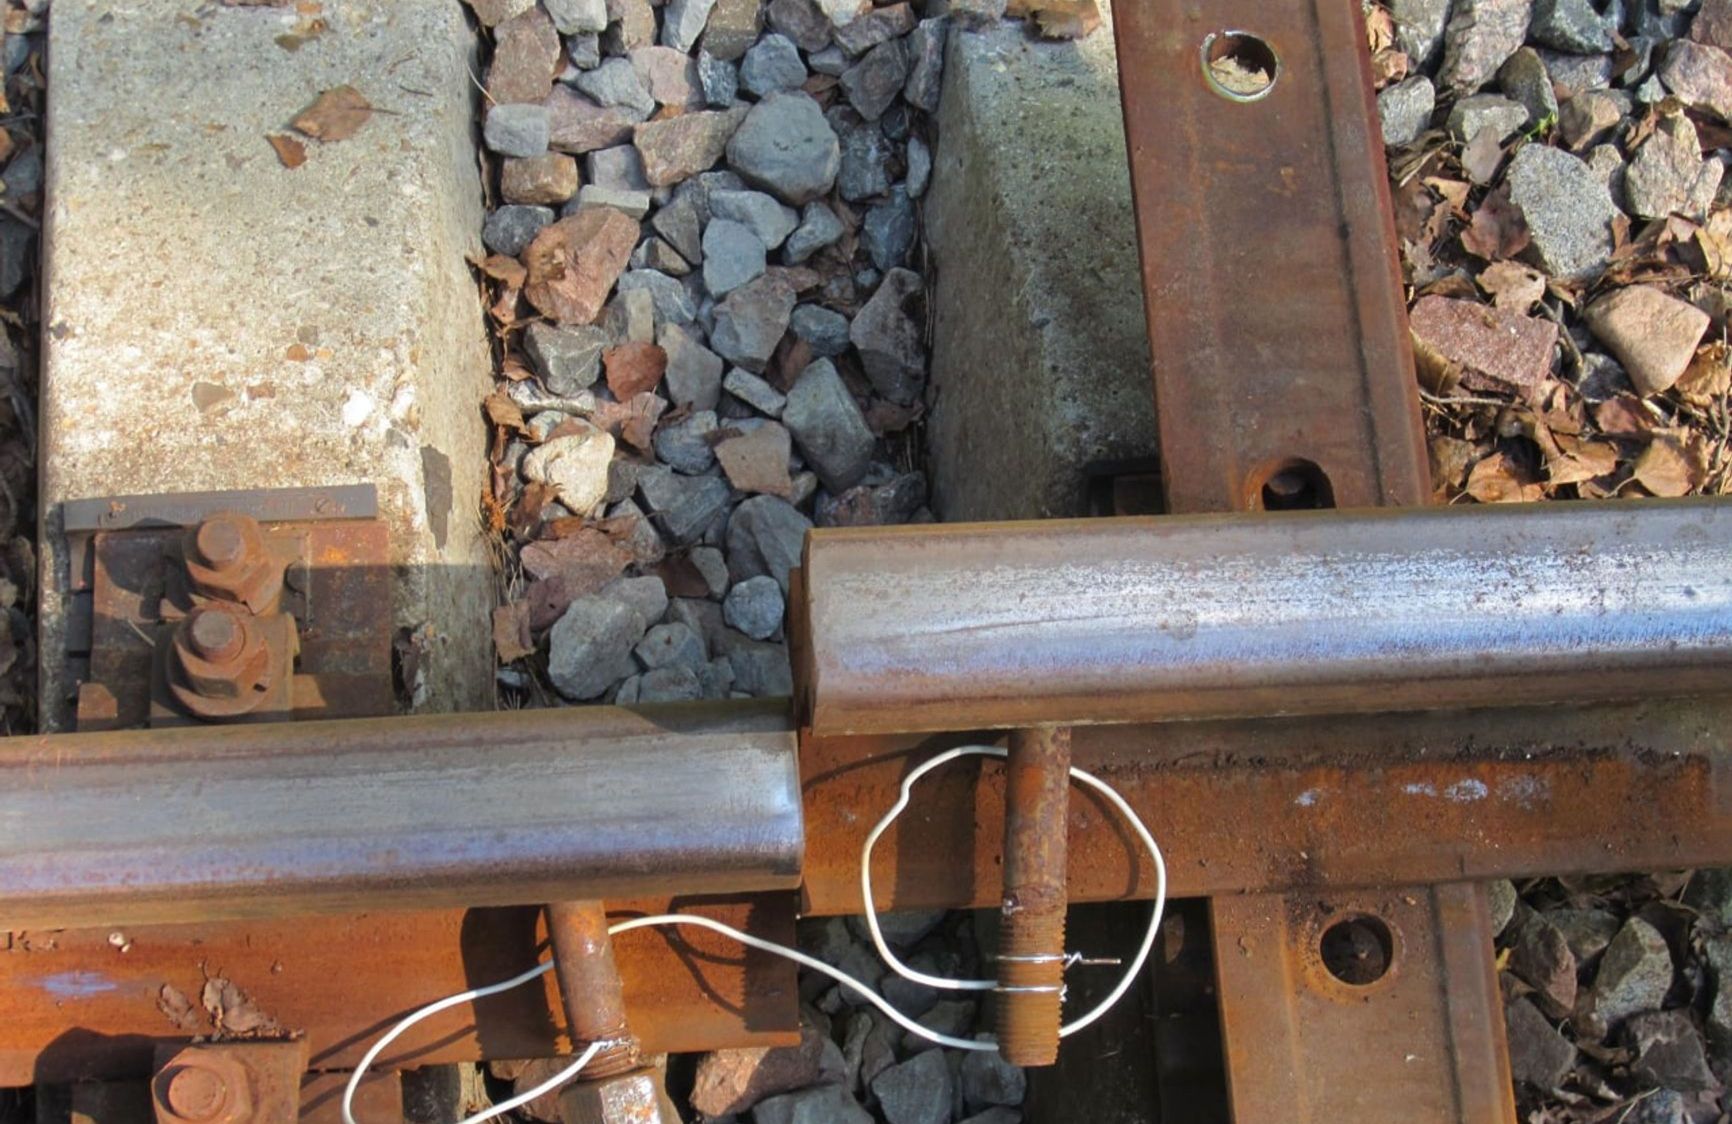 Sabotaged railroad siding leading to a military unit. The rails are shorted with a wire to prevent signaling current from detecting a gap